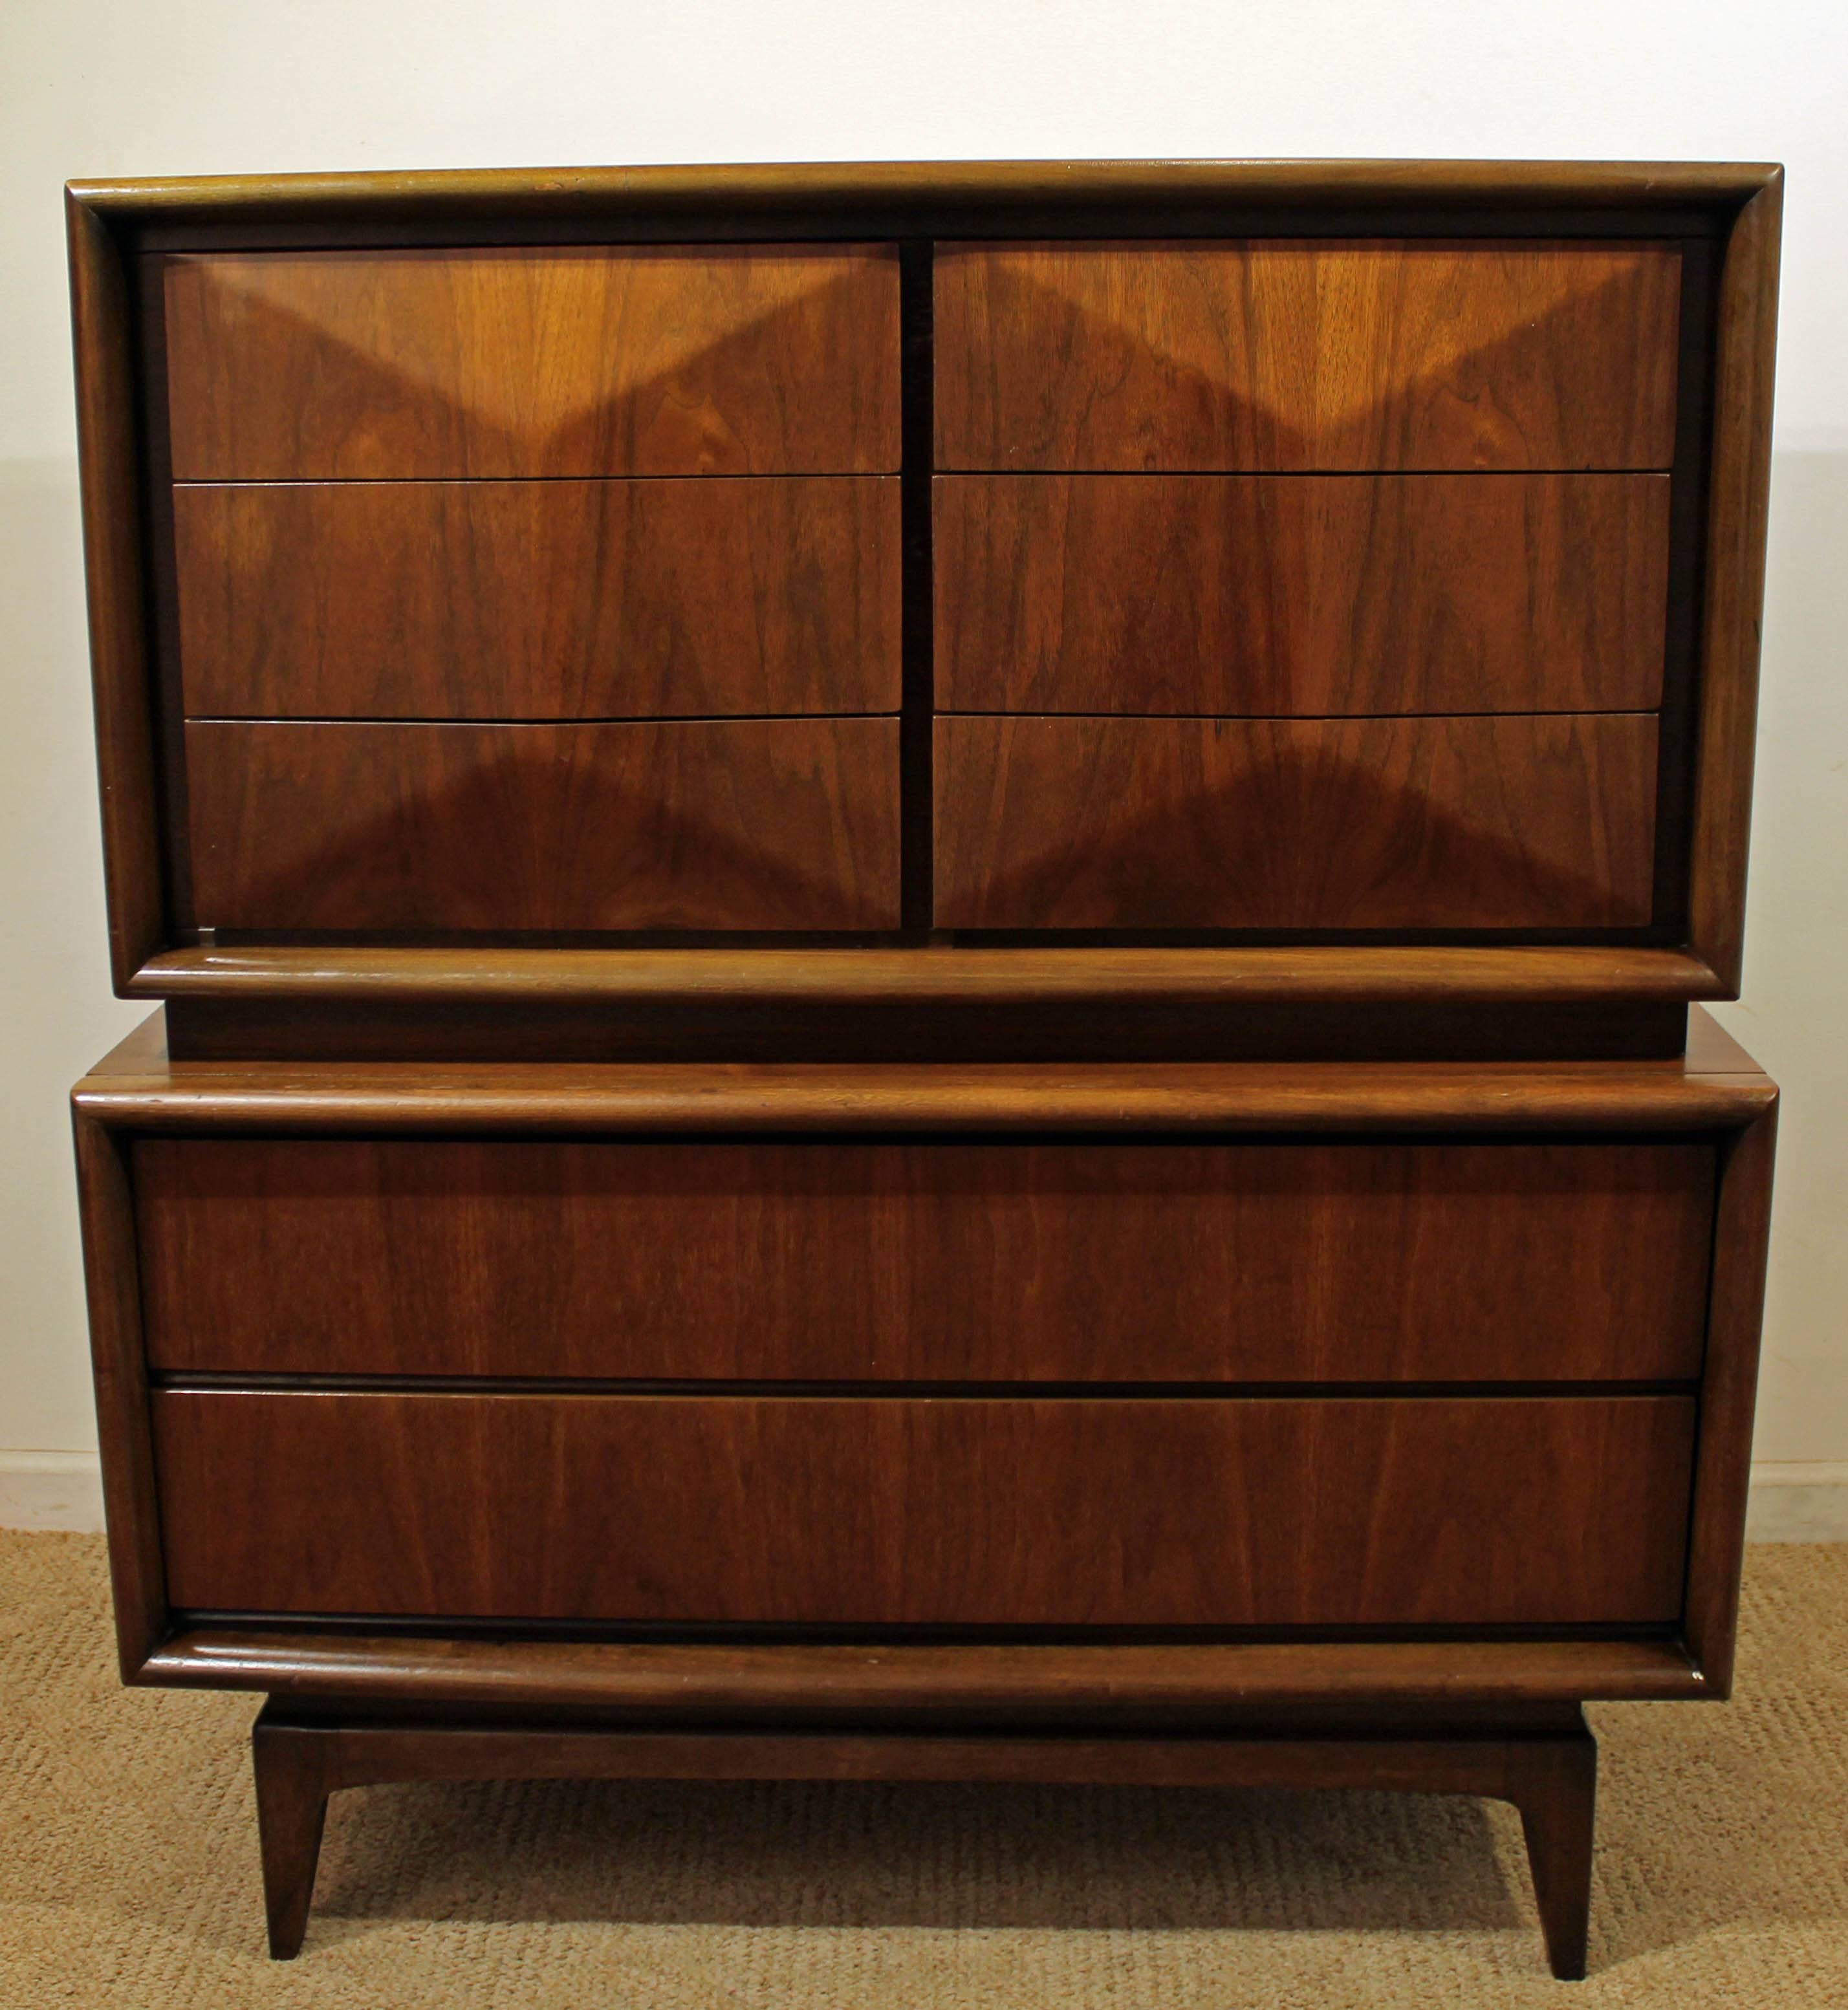 Offered is a walnut tall chest, made by United Furniture. It is signed.

Dimensions: 44